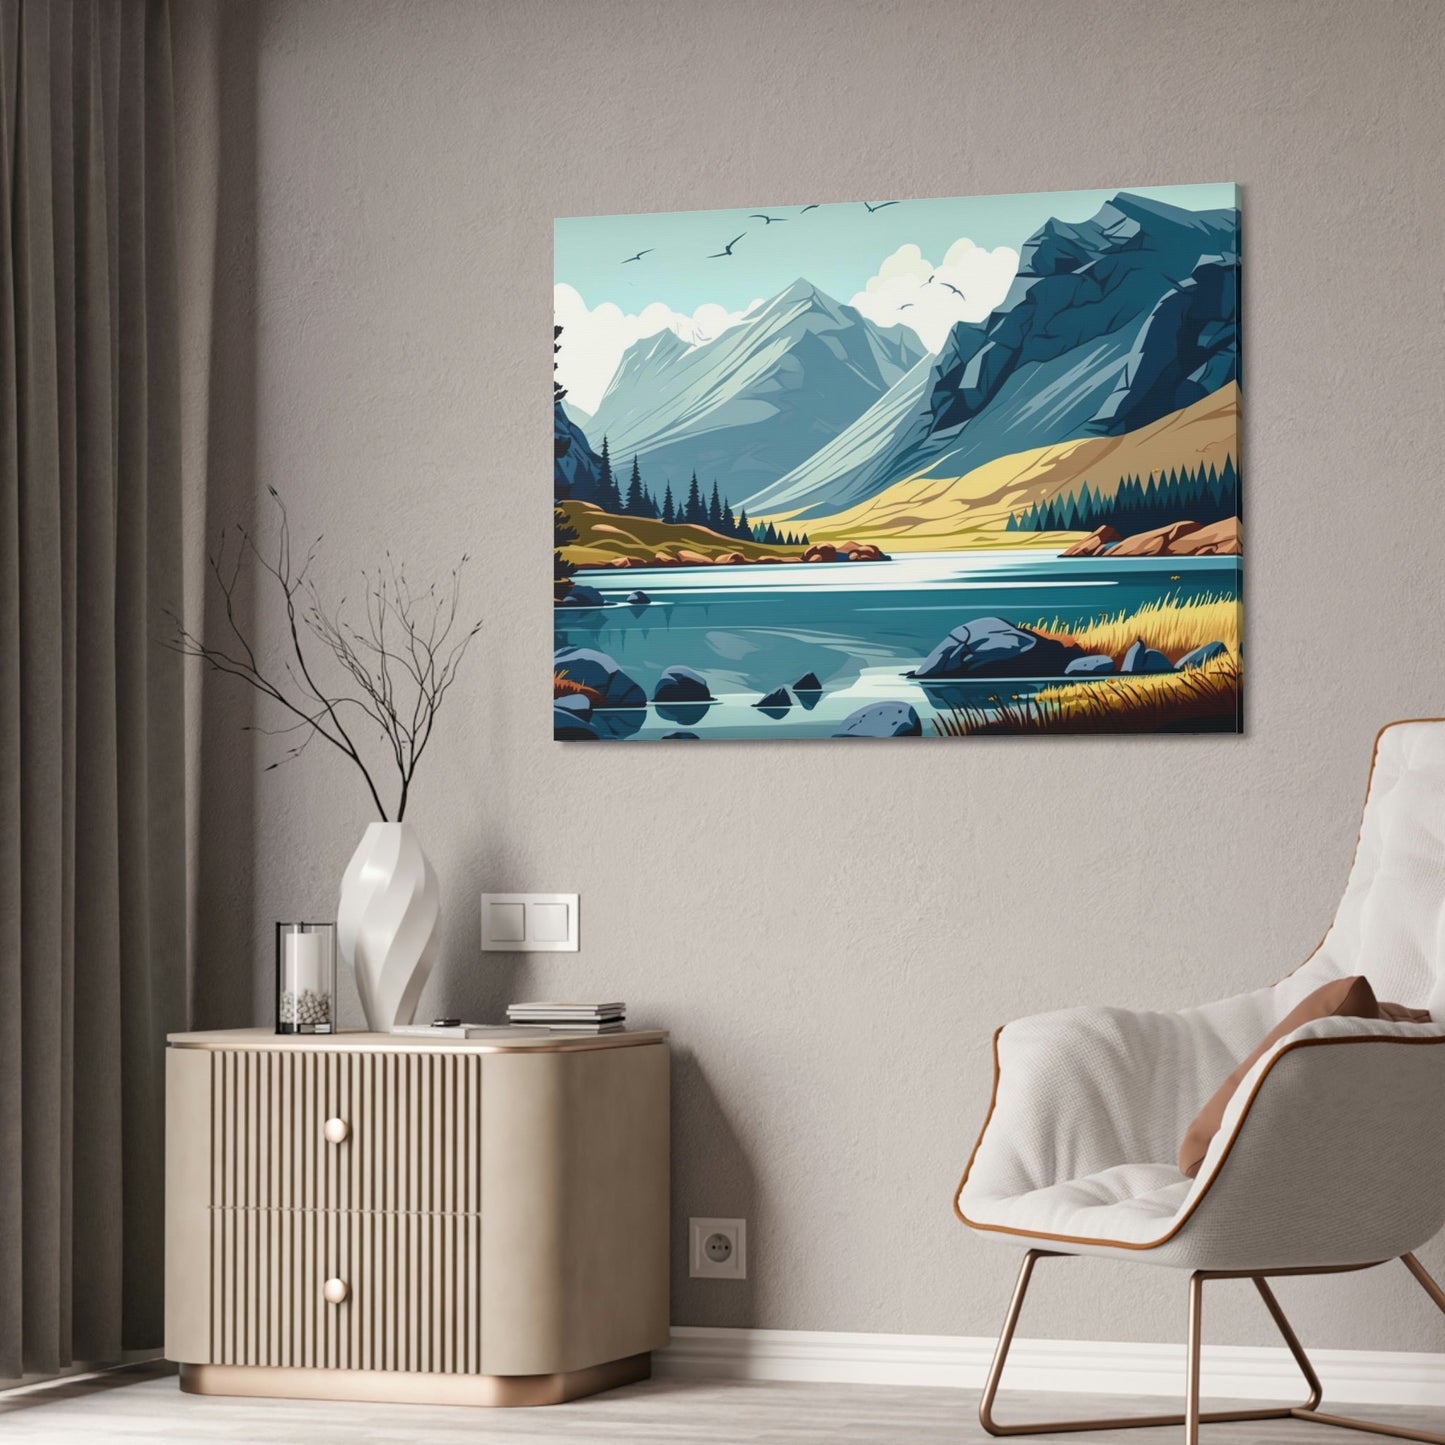 Lakeside Beauty: Wall Art of a Stunning Lake Landscape on Natural Canvas & Poster